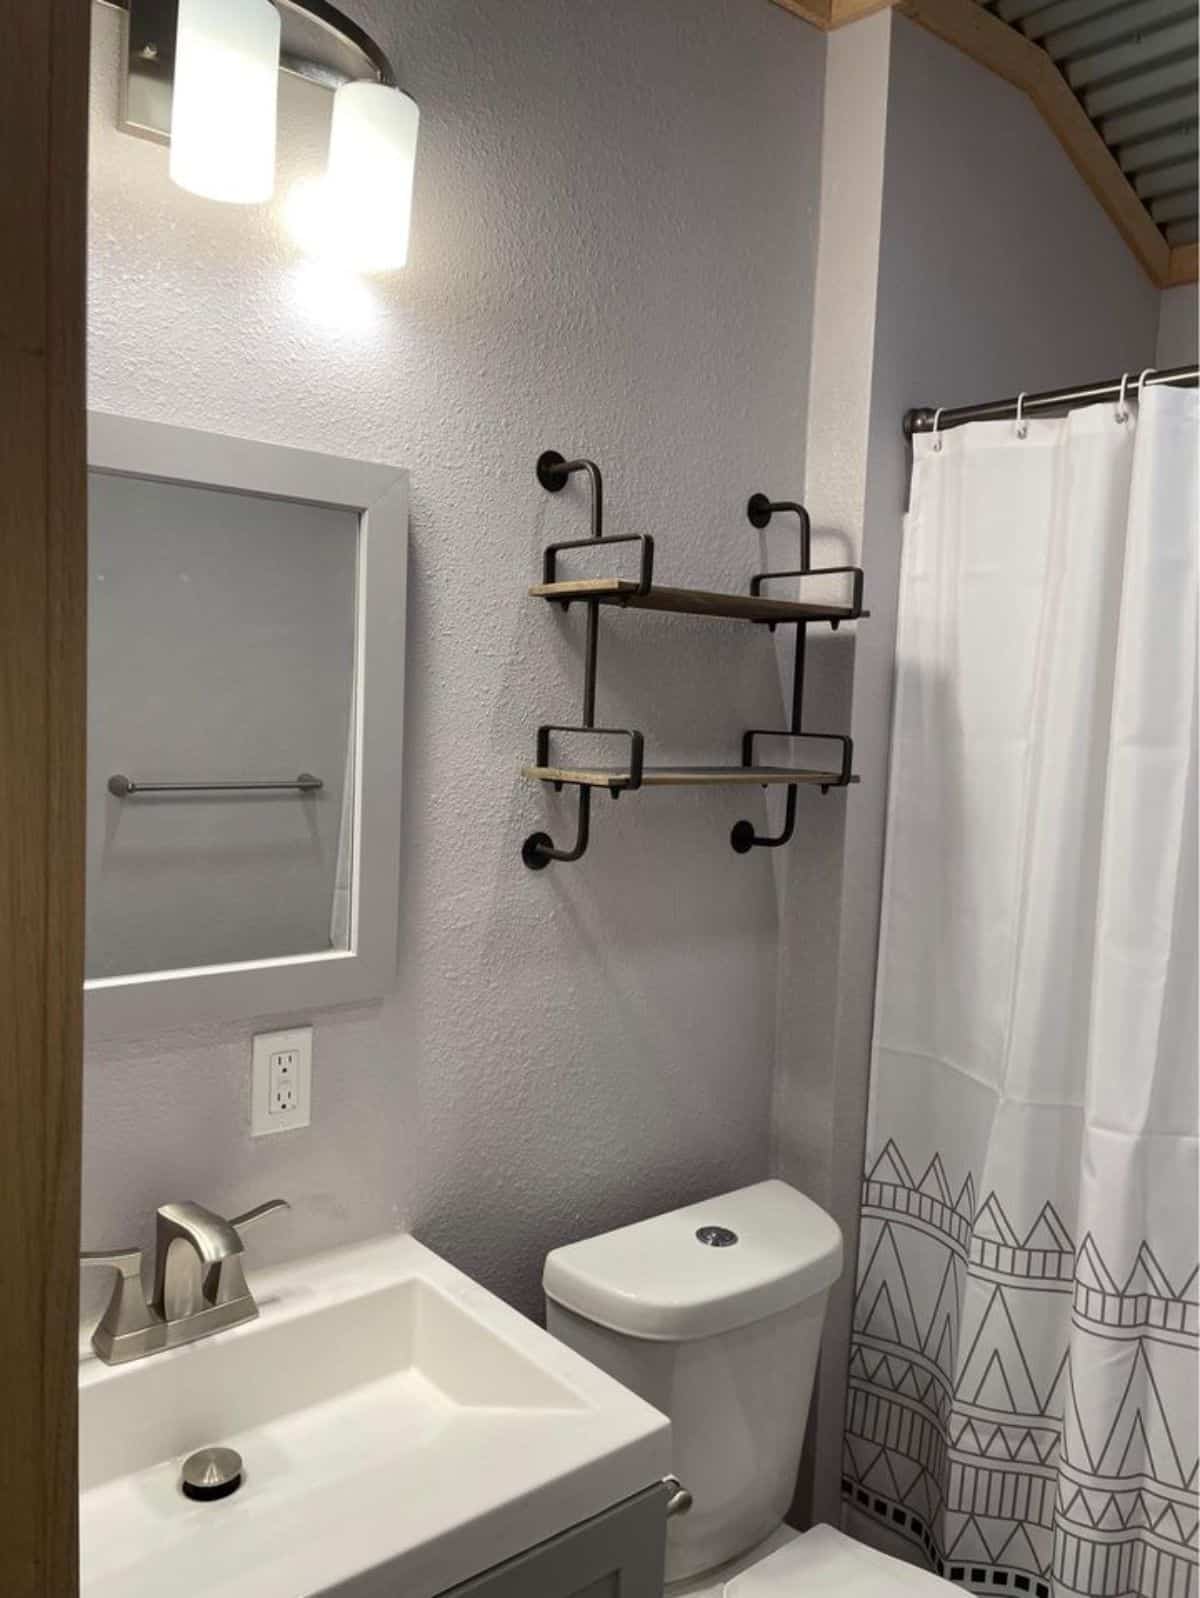 Bathroom of spacious tiny home has all the standard fittings